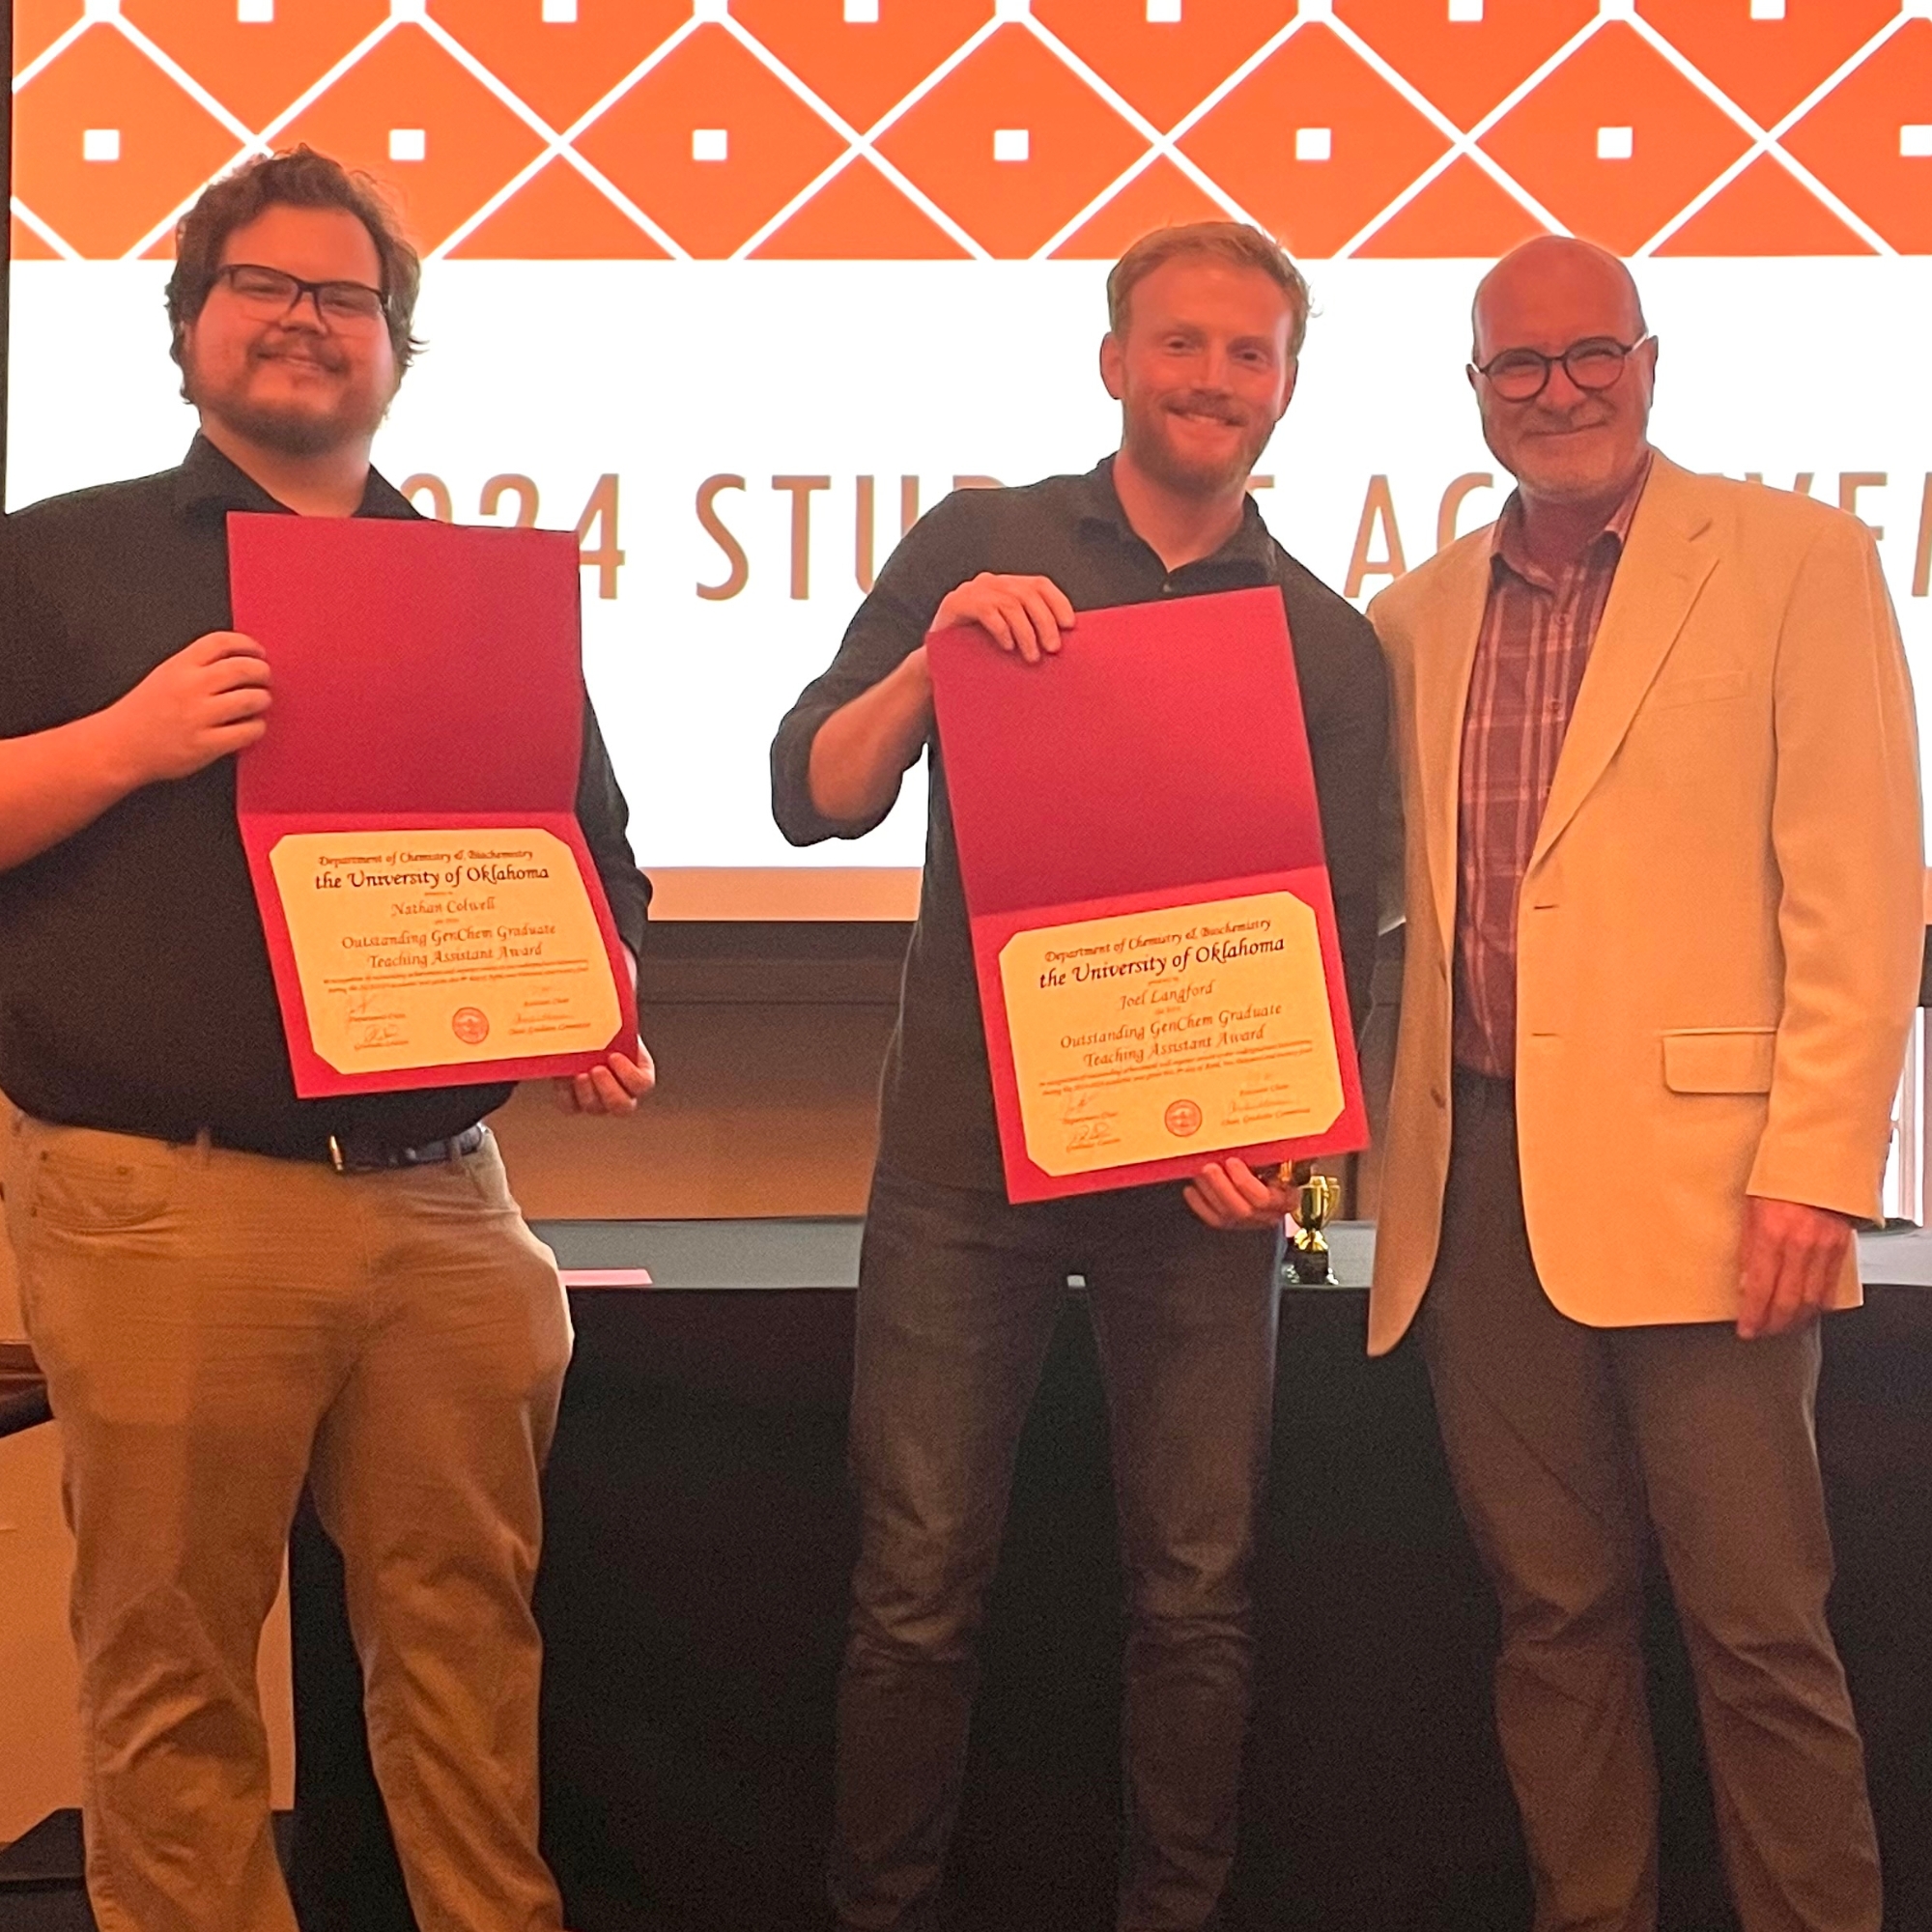 Nathan Colwell and Joel Langford holding awards with Dr. John Peters